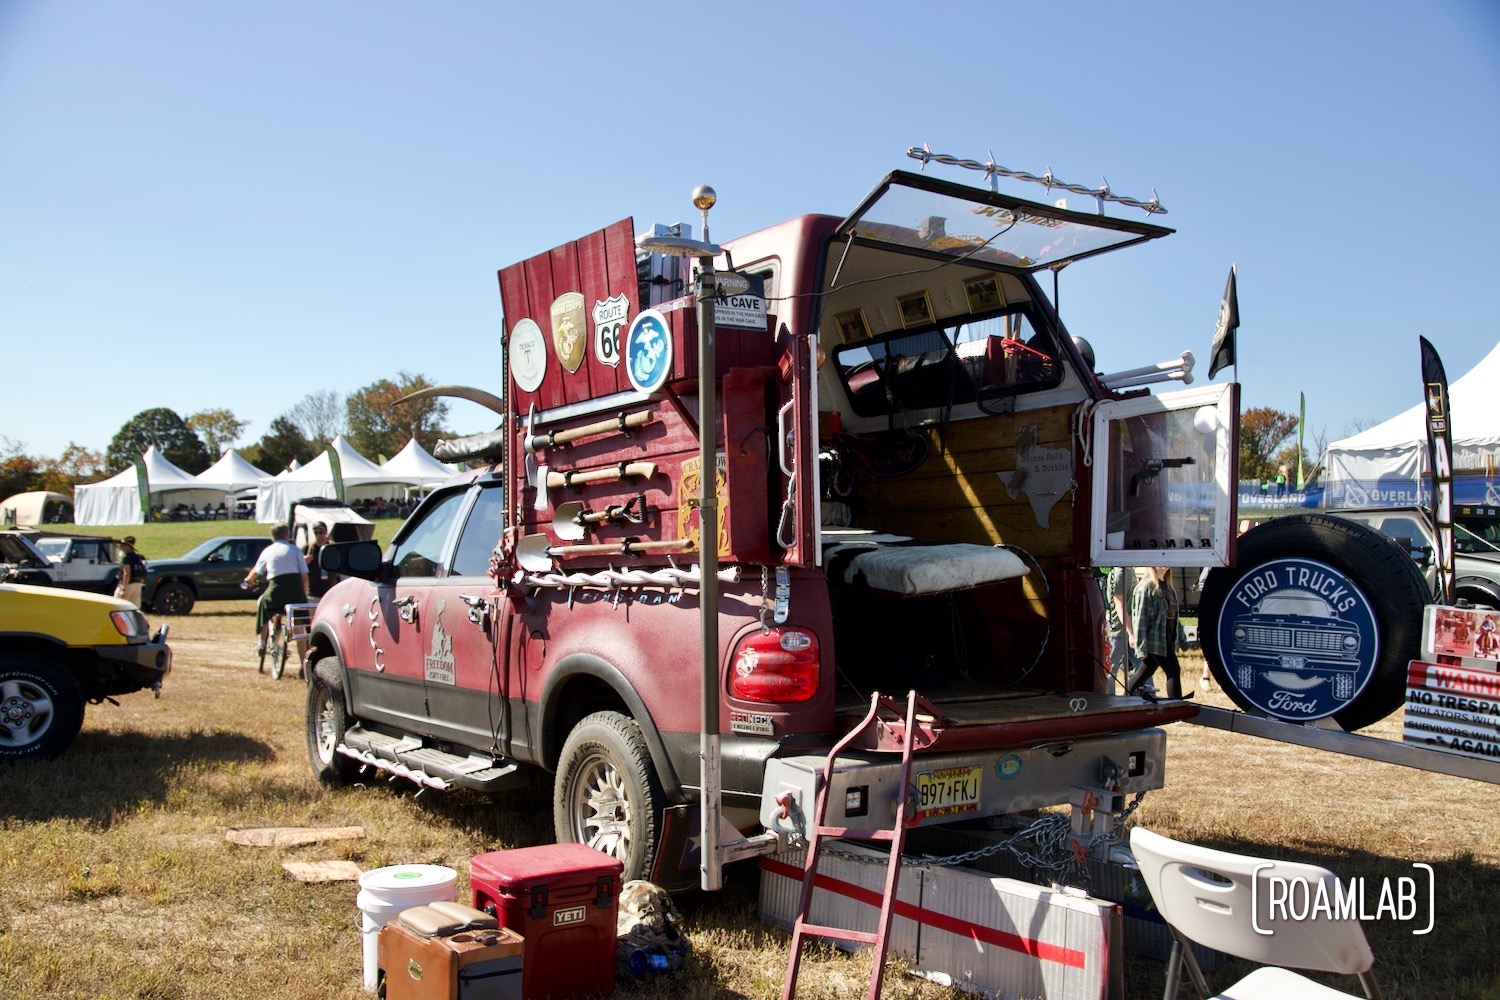 Red Neck Truck on display in the DIY Showcase during Overland Expo East 2022